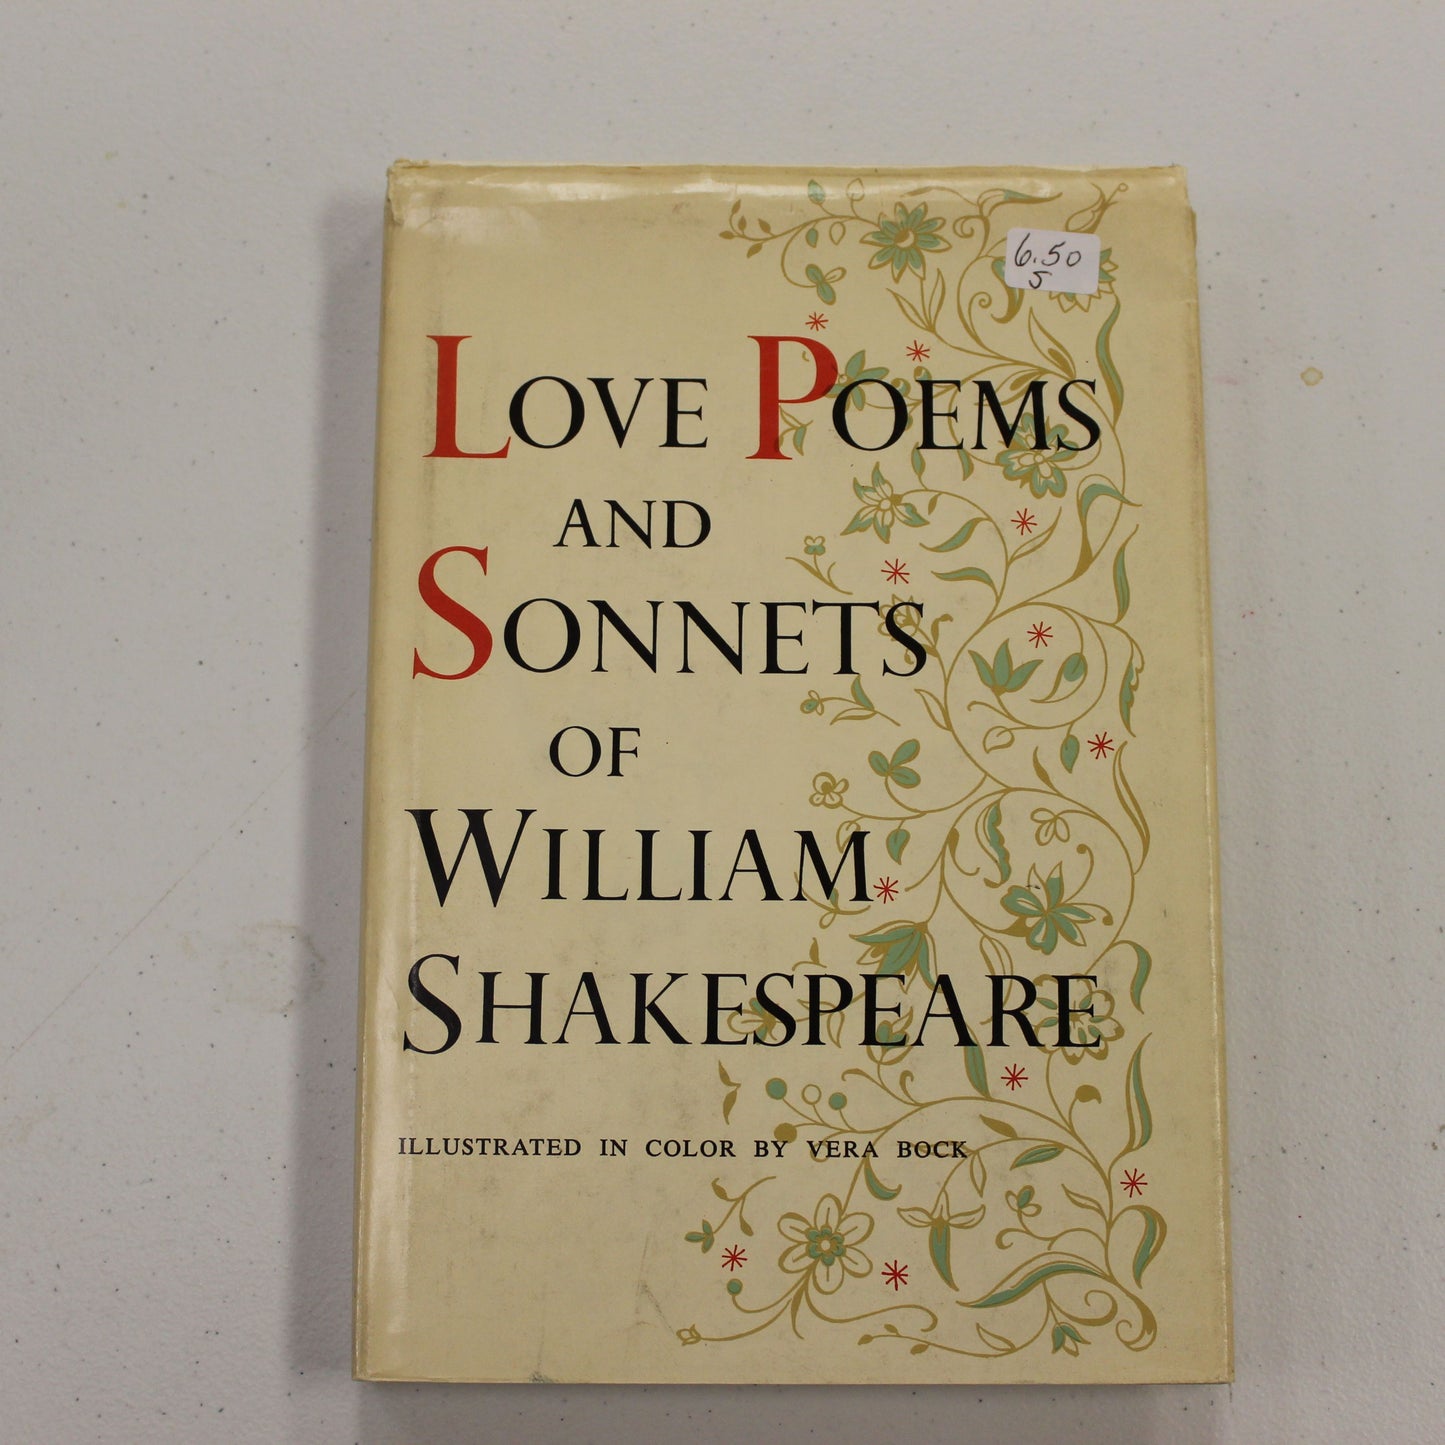 LOVE POEMS AND SONNETS OF WILLIAM SHAKESPEARE